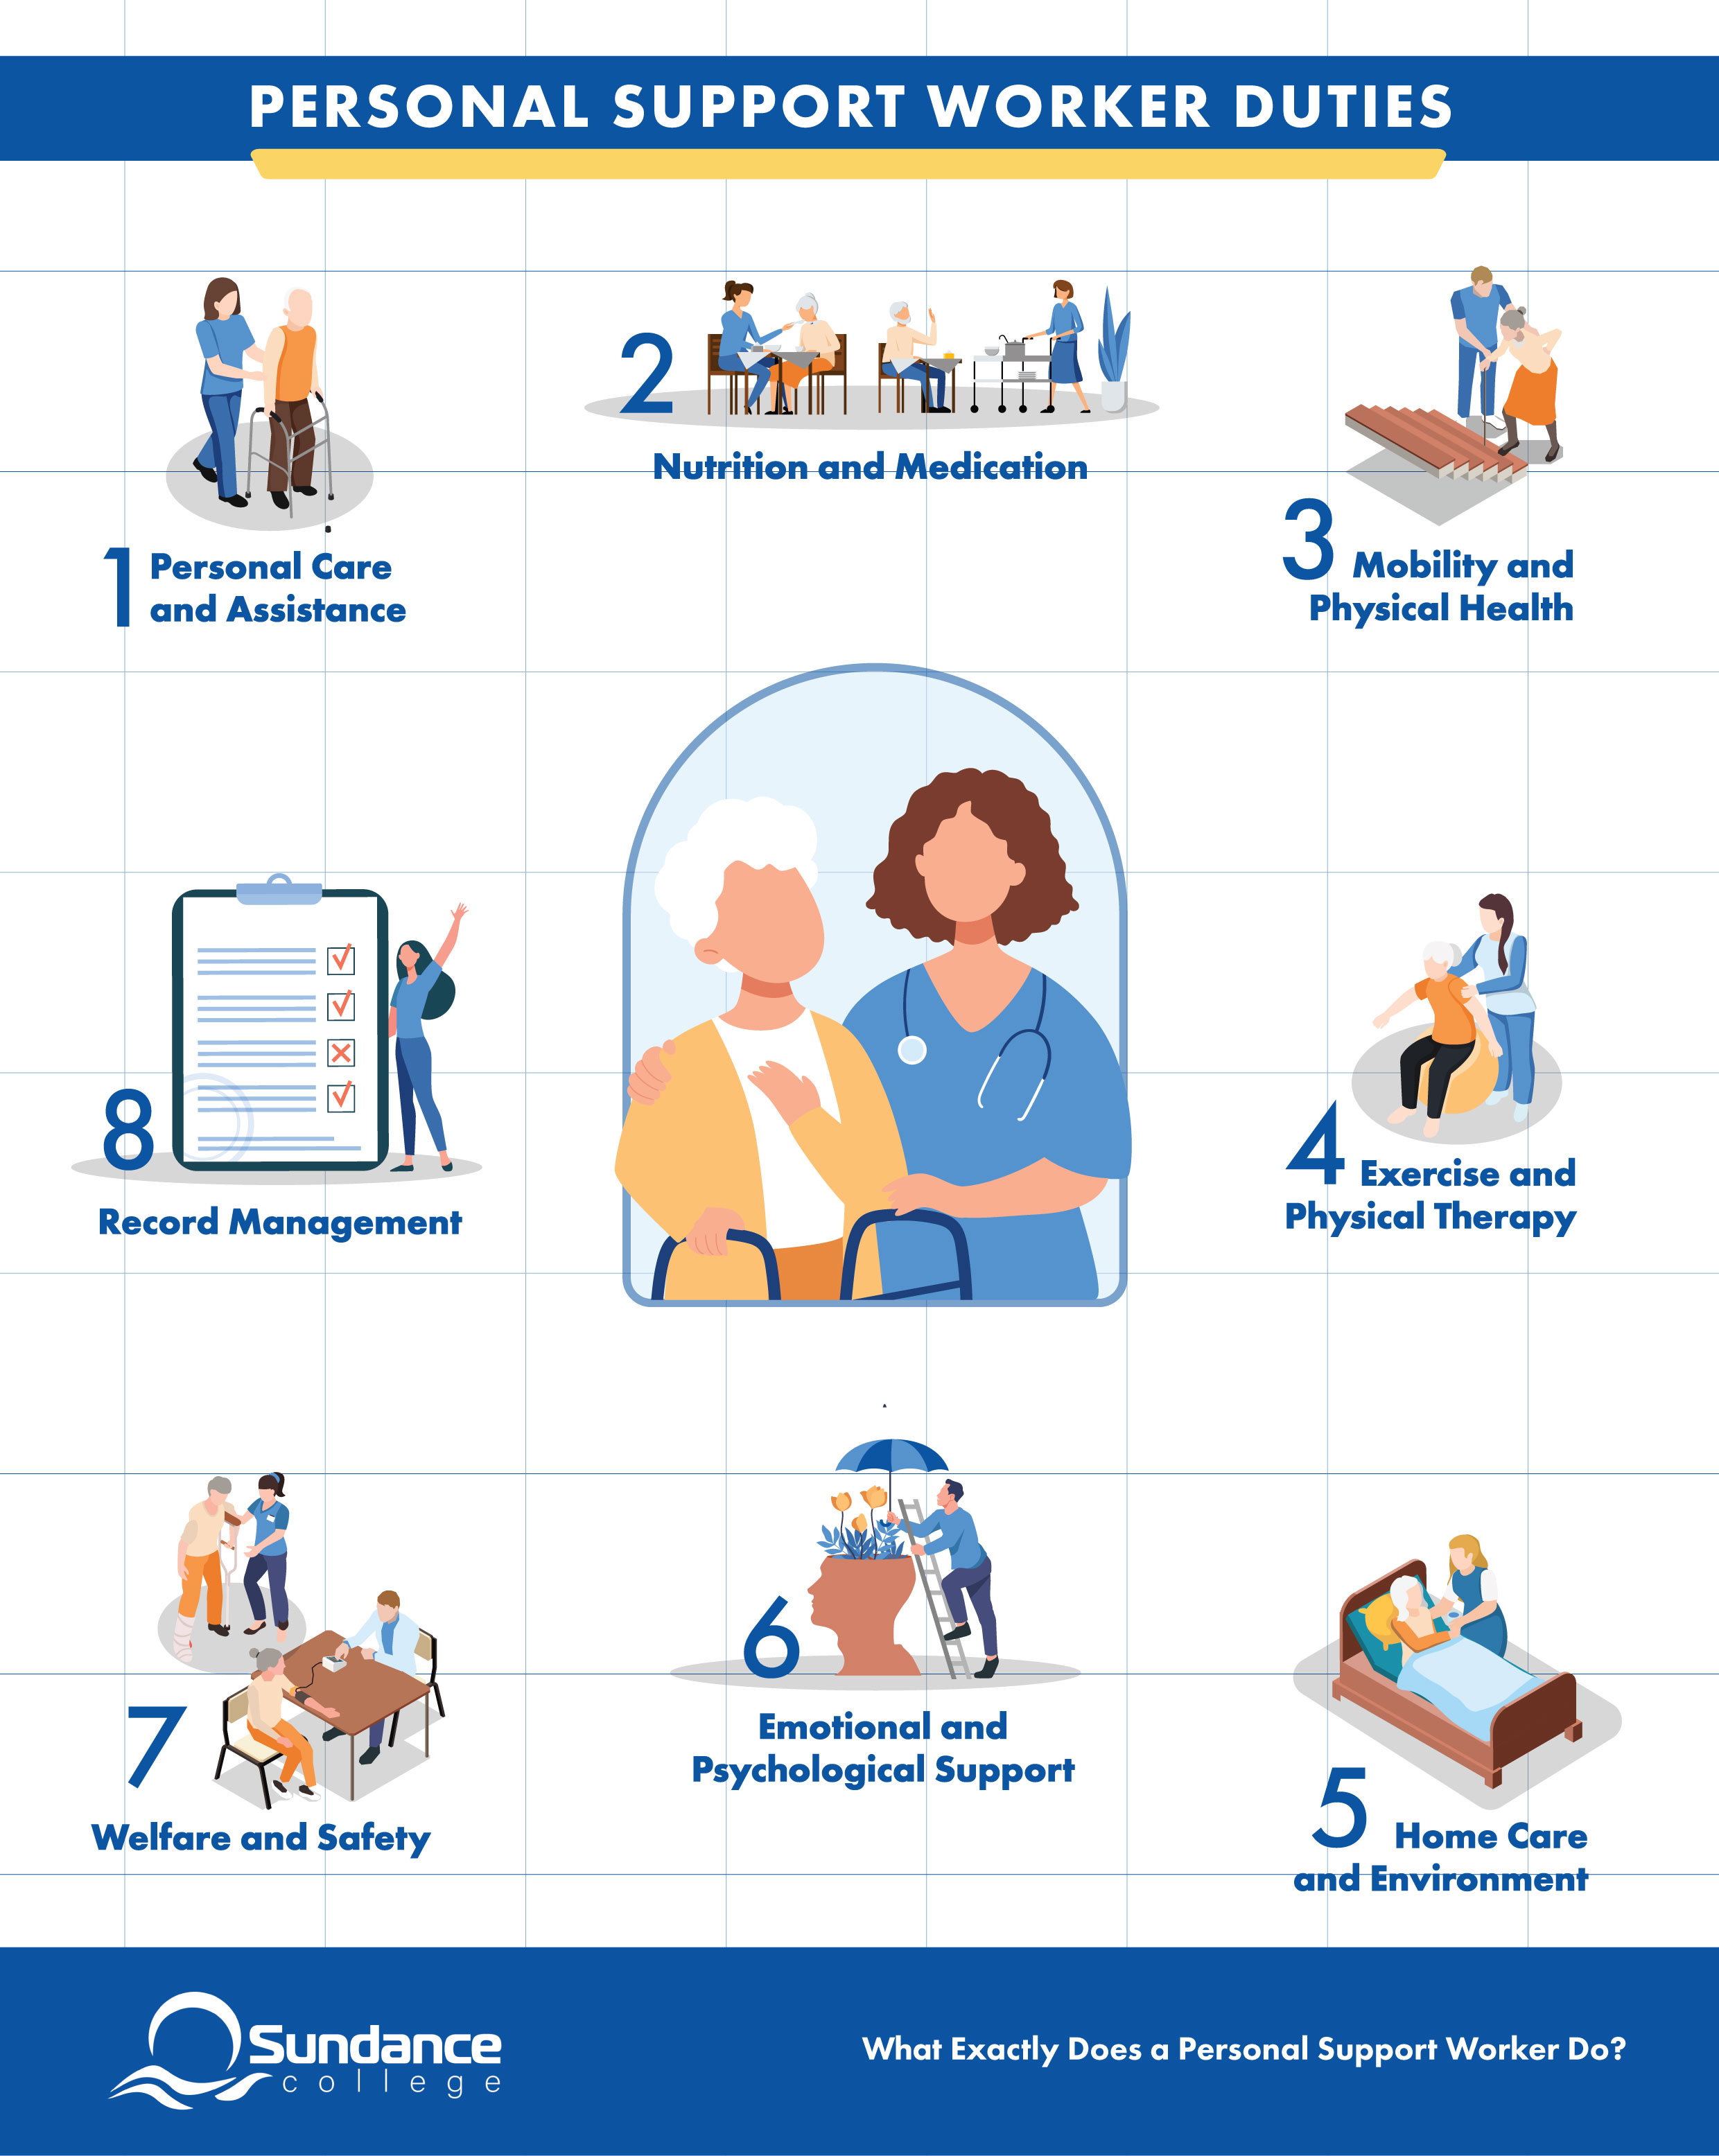 An infographic displaying the eight duties of a personal support worker.